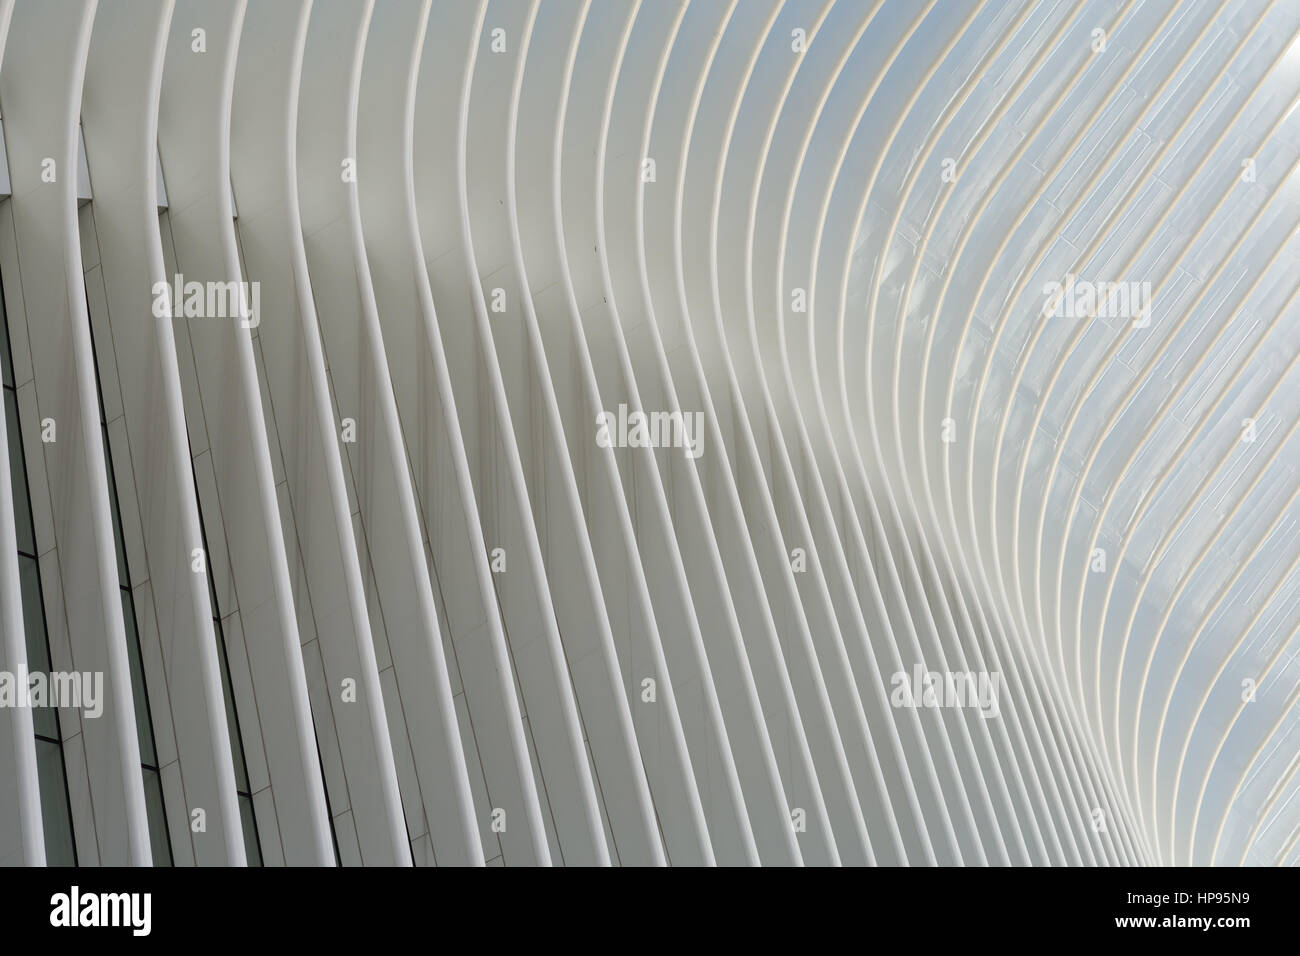 A close-up view of the ribbed wings of the Oculus World Trade Center Transportation Hub in New York City. Stock Photo